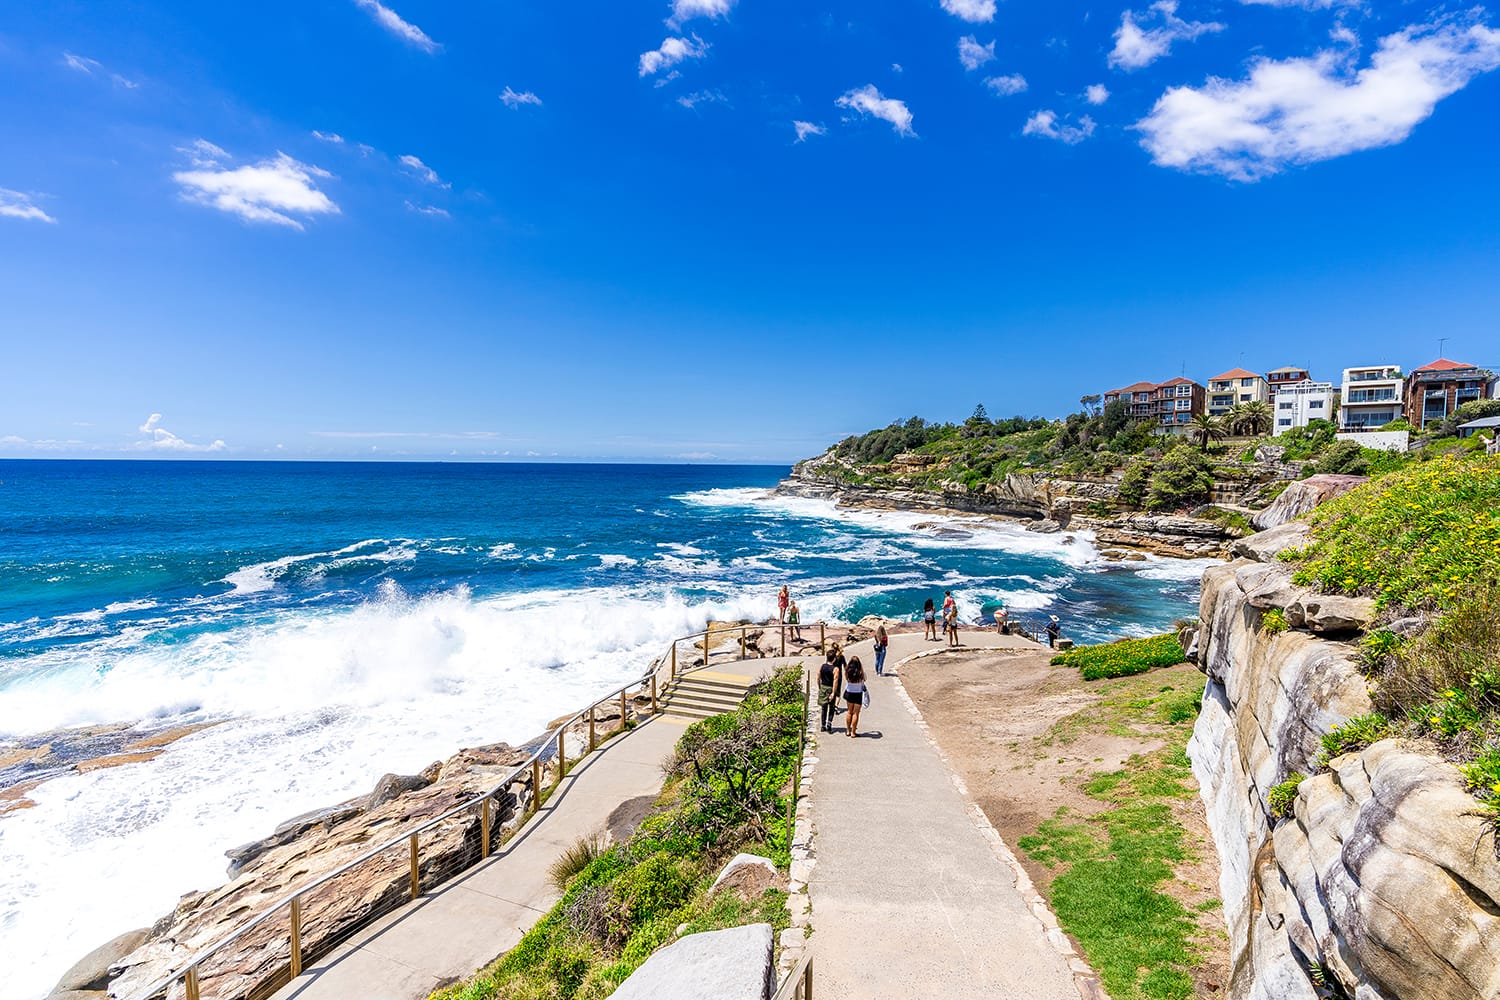 Sydney's Bondi to Coogee Beach Coastal Walk takes in some spectacular views and is a must see highlight for any tourist. Australia